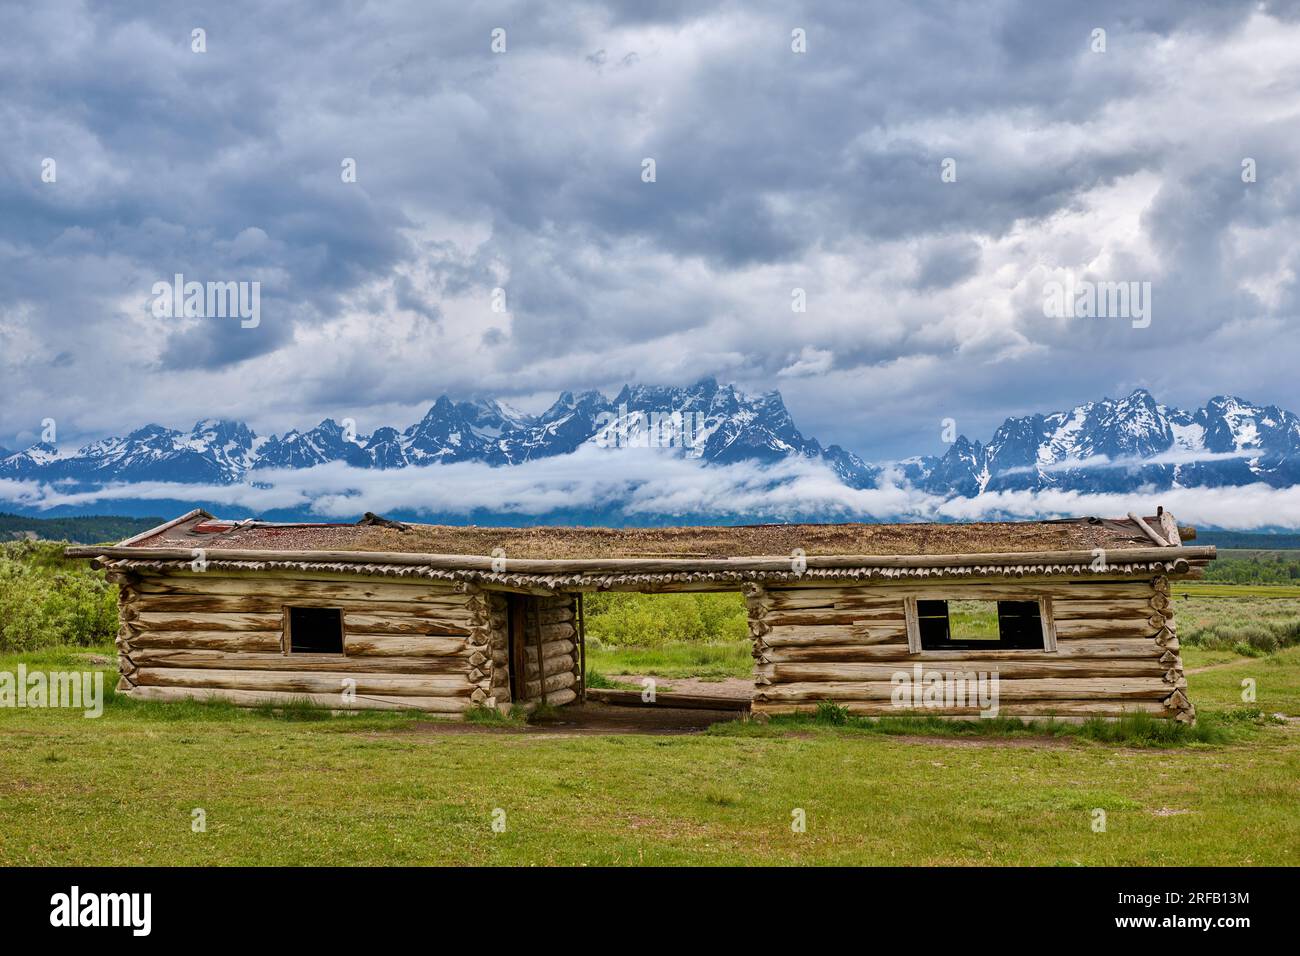 J.P. Cunningham Cabin, Cunningham Cabin Historic Site and Grand Teton Range under heavy clouds, Grand Teton National Park, Wyoming, United States of A Stock Photo